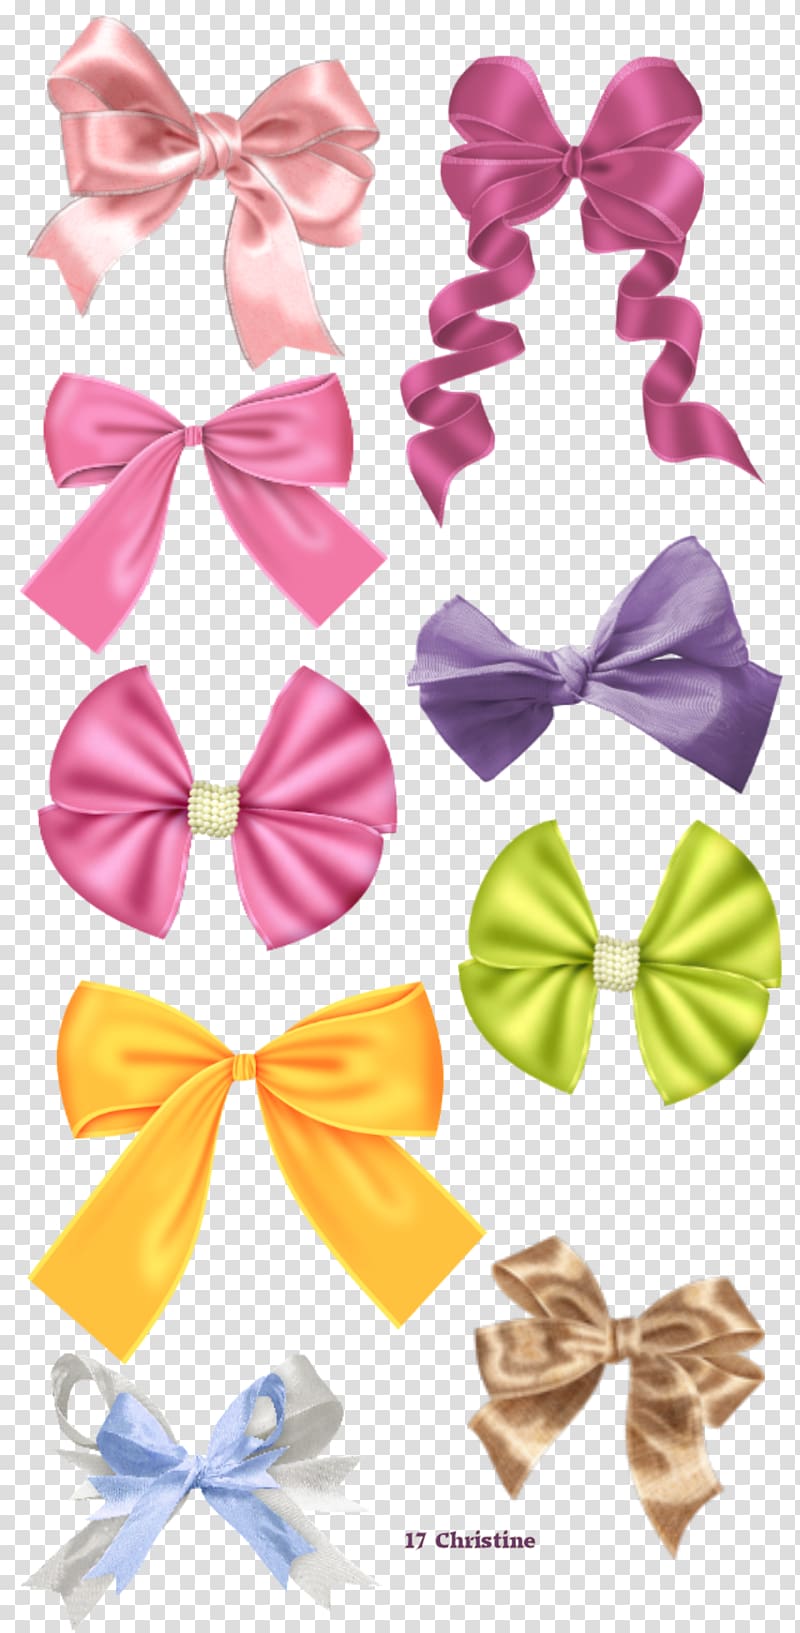 Hair tie Bow tie Bible Lazo Ribbon, ribbon transparent background PNG clipart